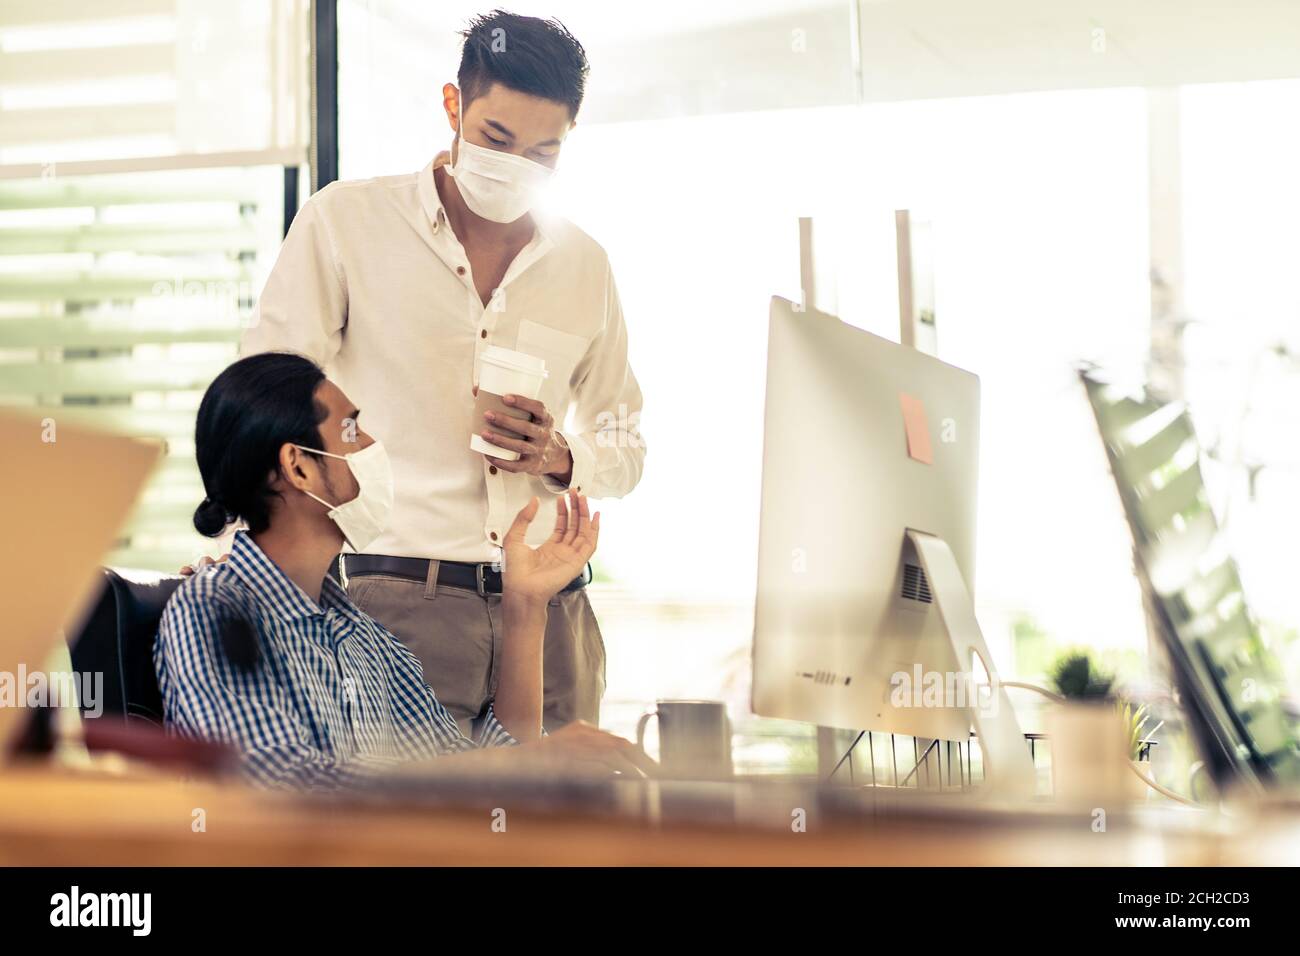 Two asian businessman talk discuss their work in morning after office reopen due to coronavirus COVID-19 pandemic. They wear protective face mask to p Stock Photo